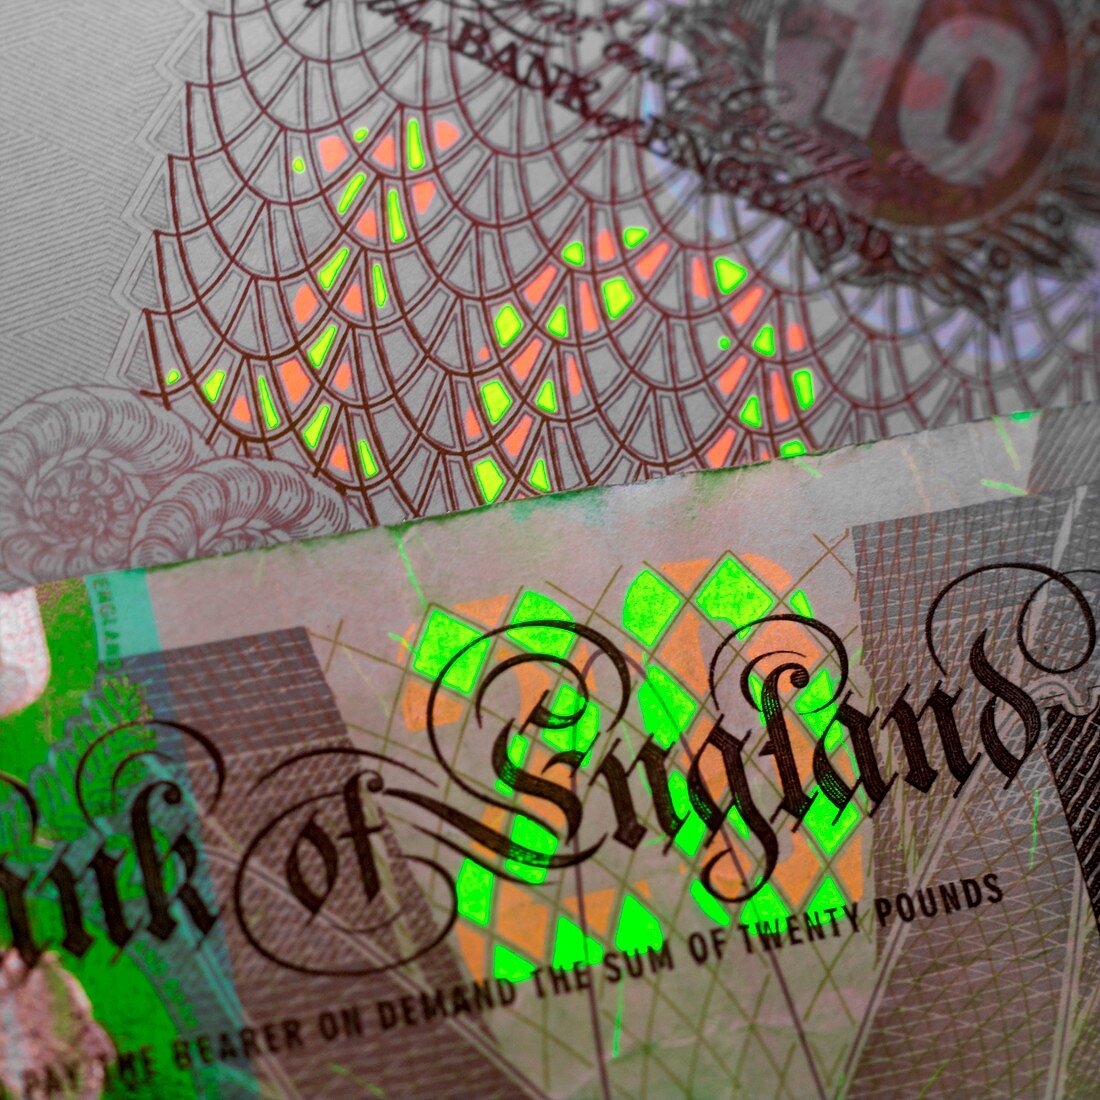 Fluorescent banknote printing